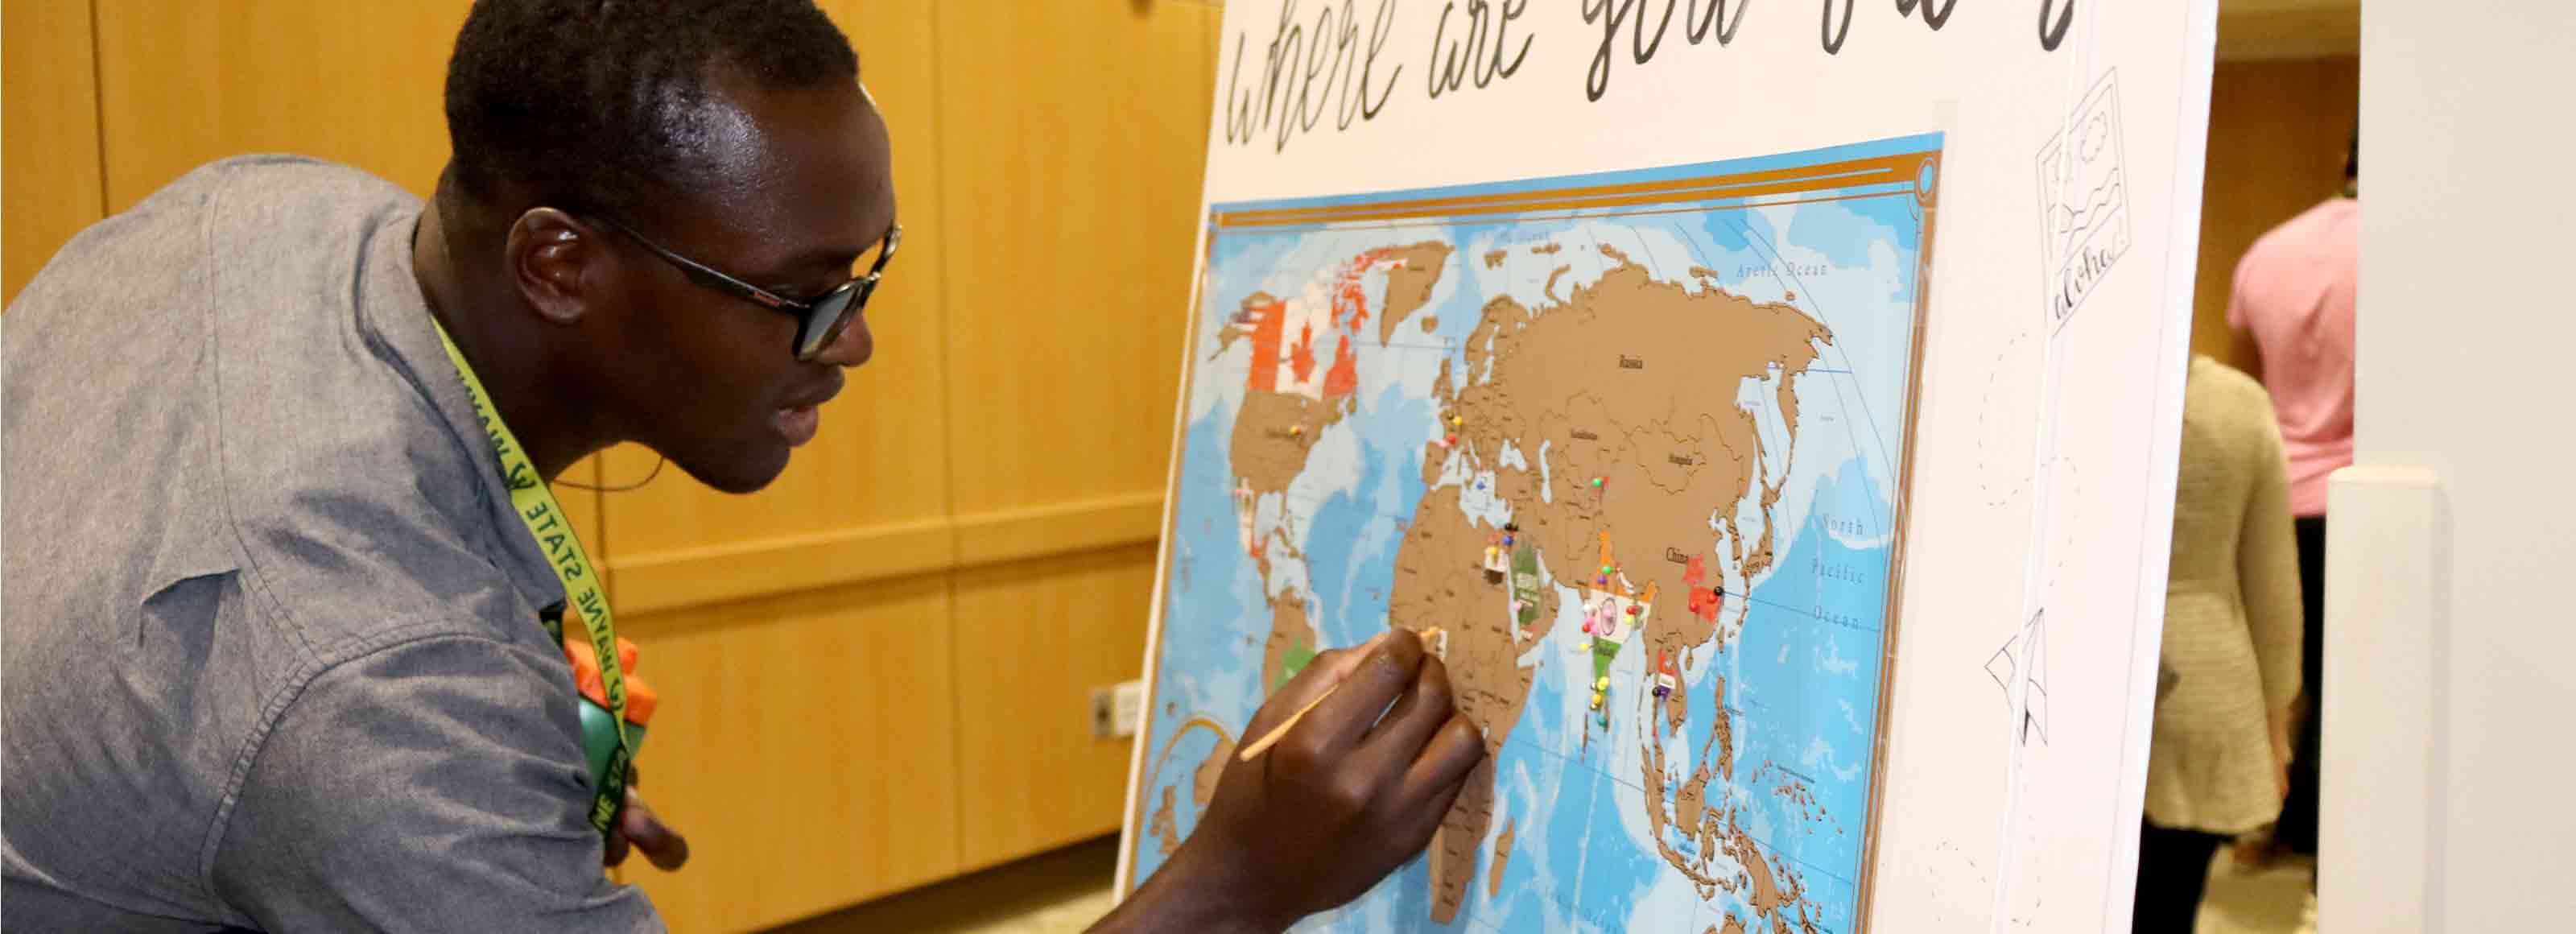 Student drawing on map